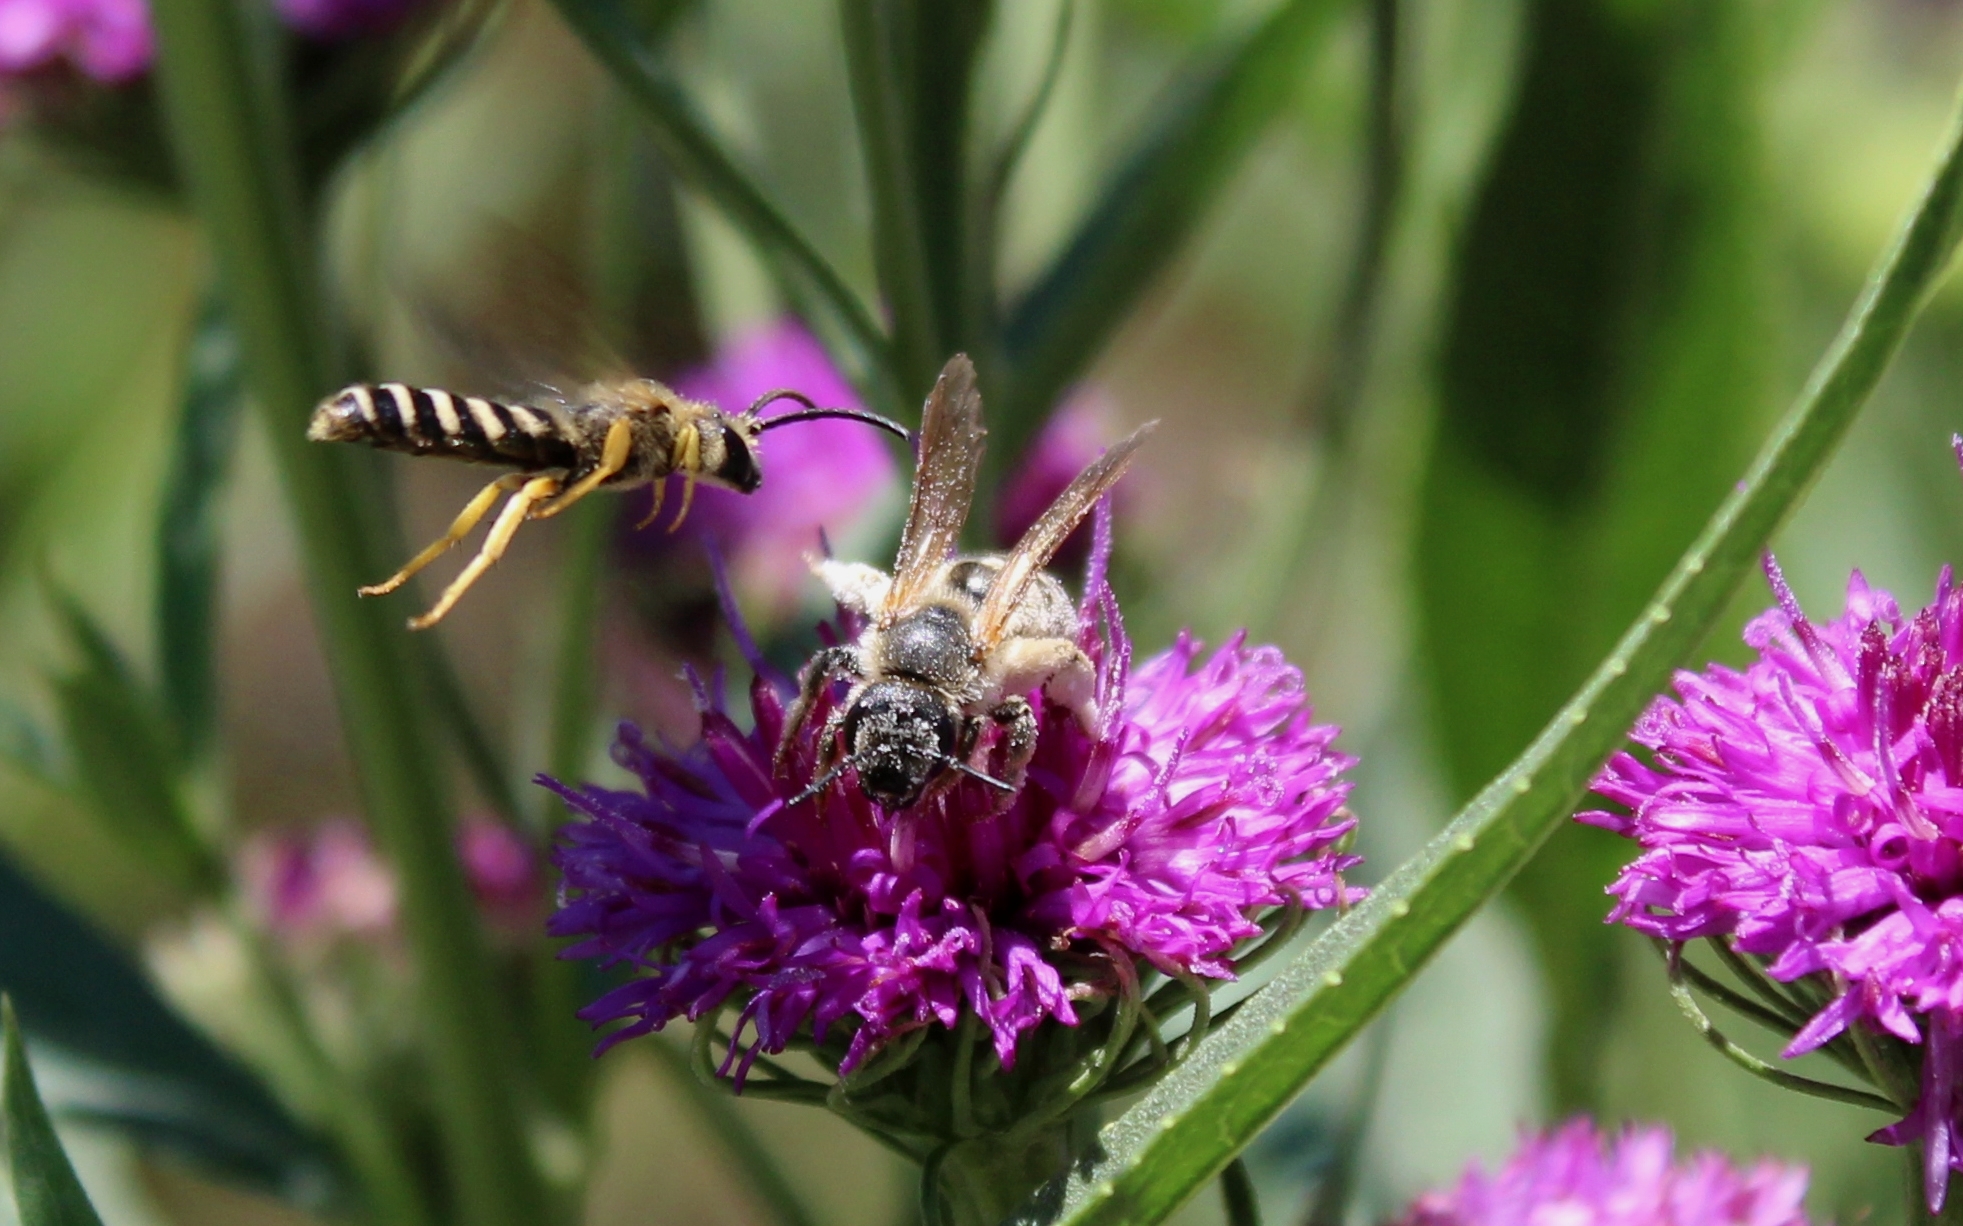 An aggressive insect approaches a hapless honeybee on a purple flower.